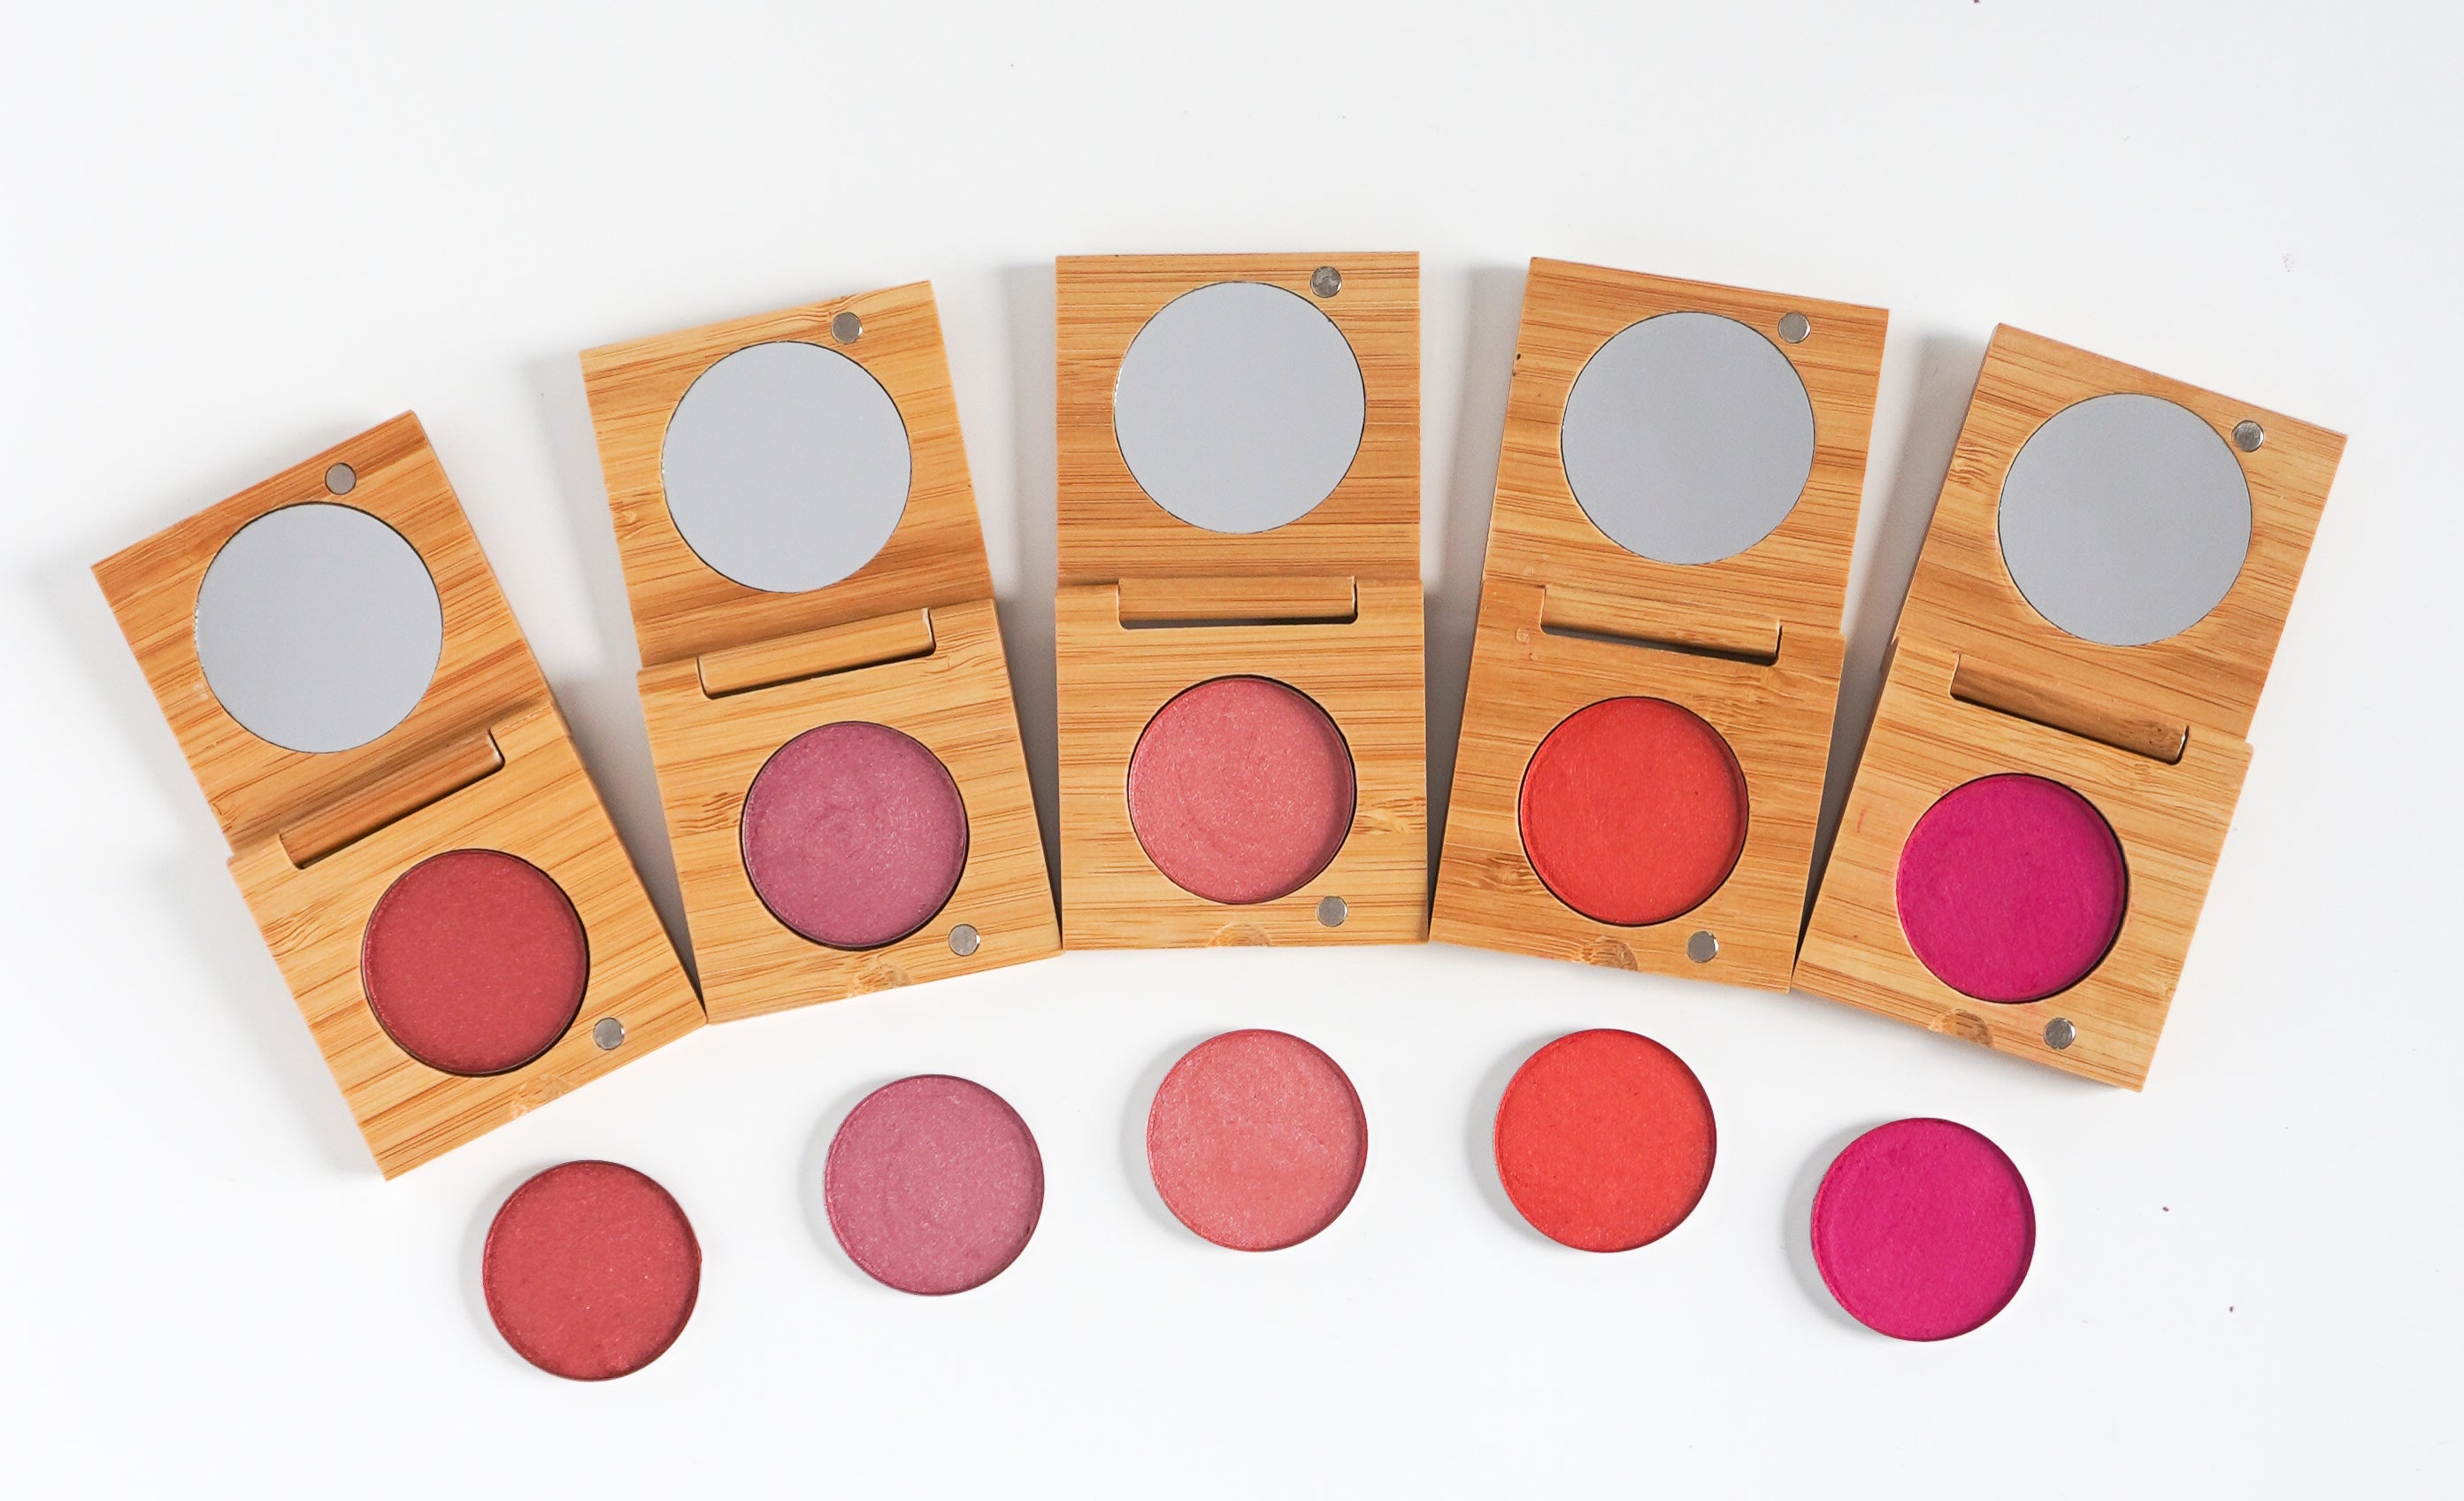 Five shades of pressed blush in refillable bamboo compacts with refills